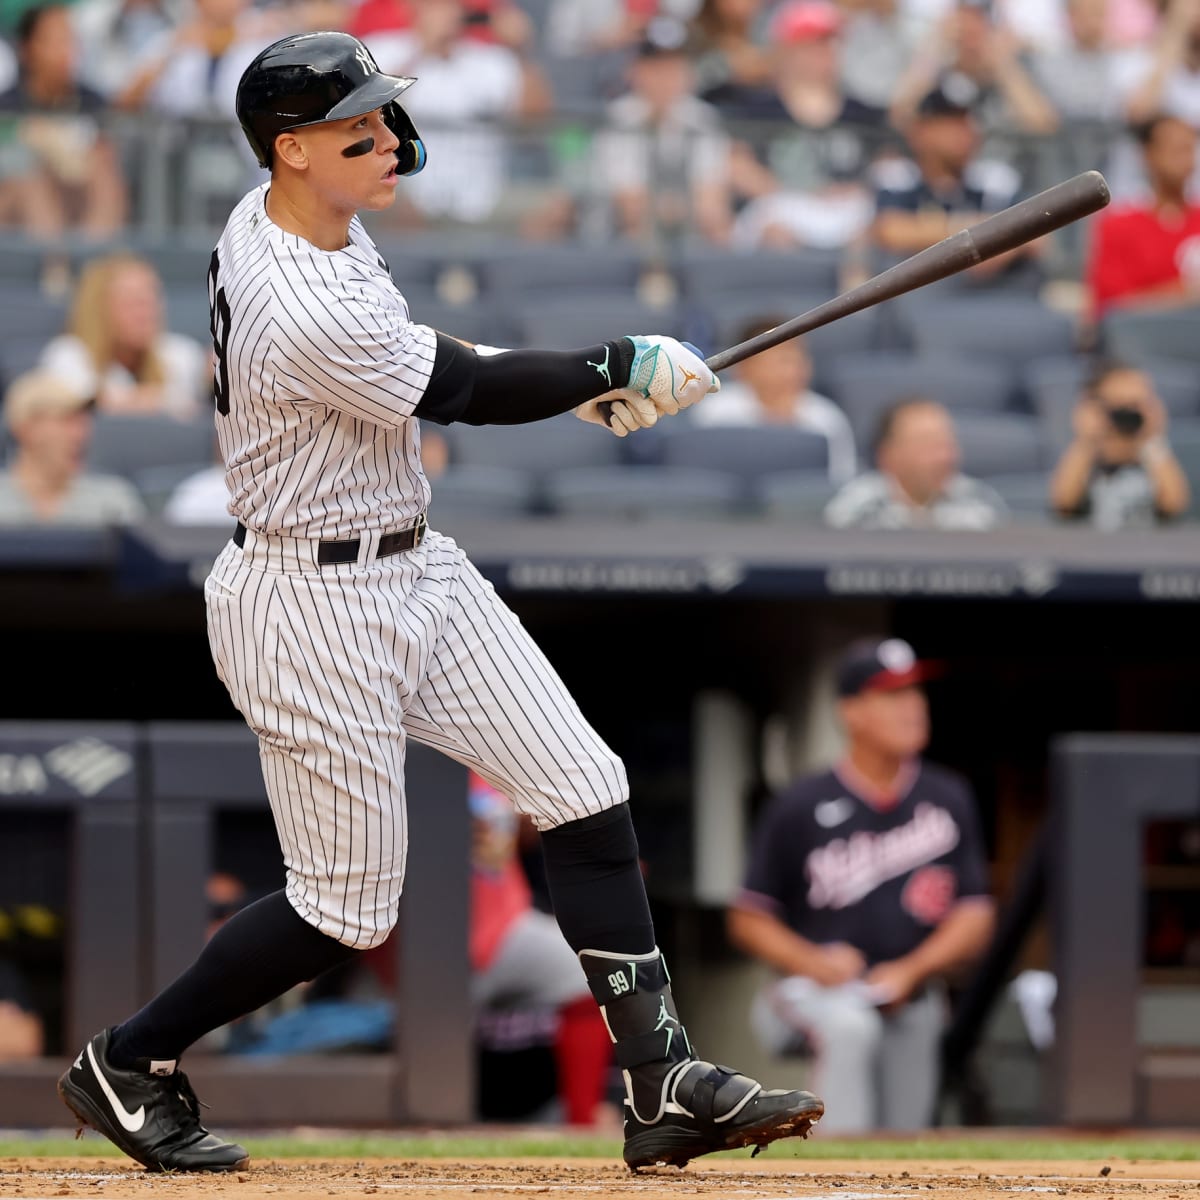 Yankees shed light on why Giancarlo Stanton keeps missing games 